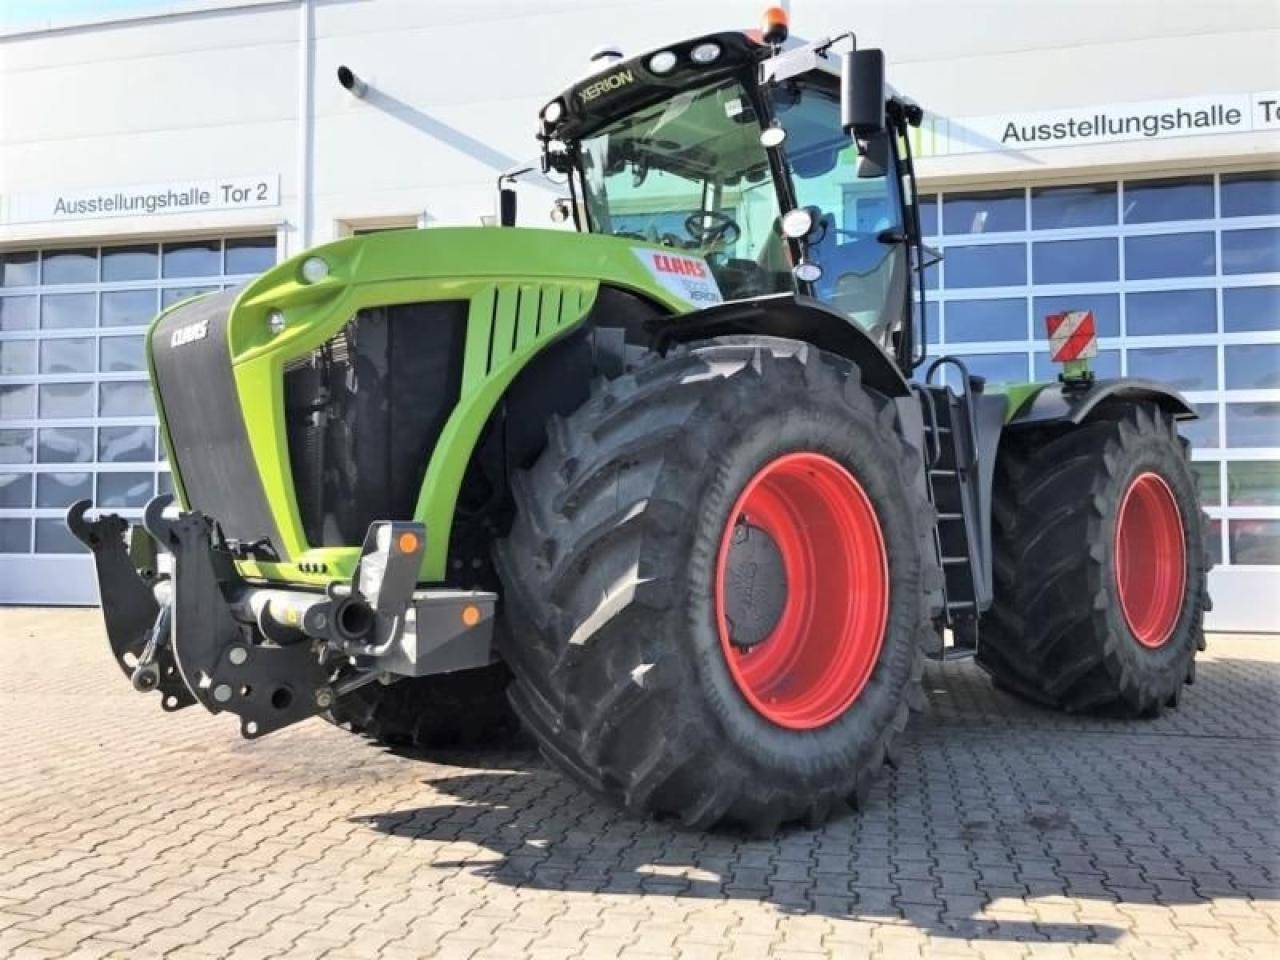 Claas xerion 5000 4wd tractor price, specs, review 2023